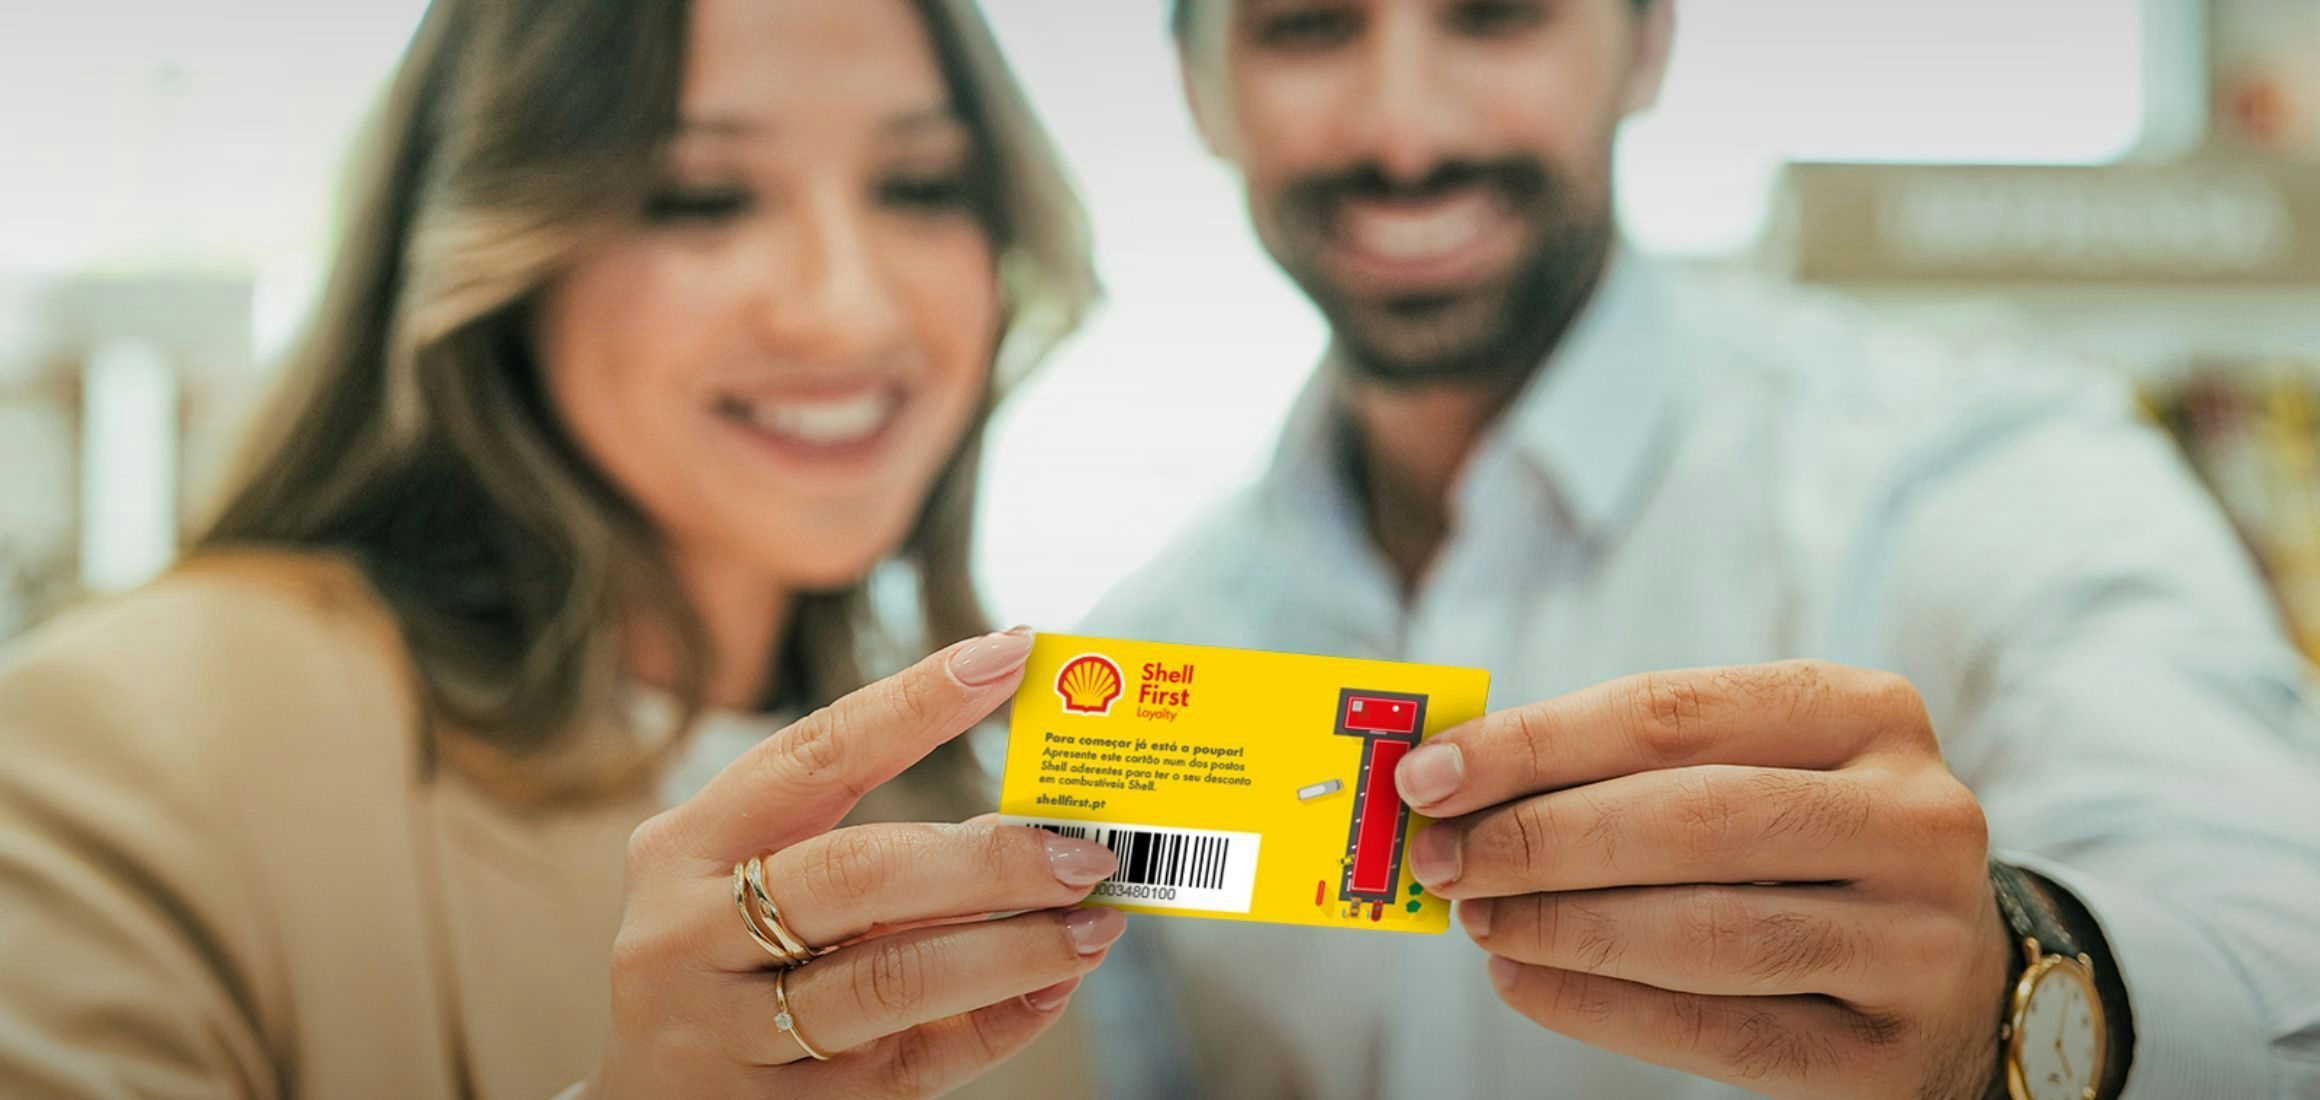 Shell First Loyalty